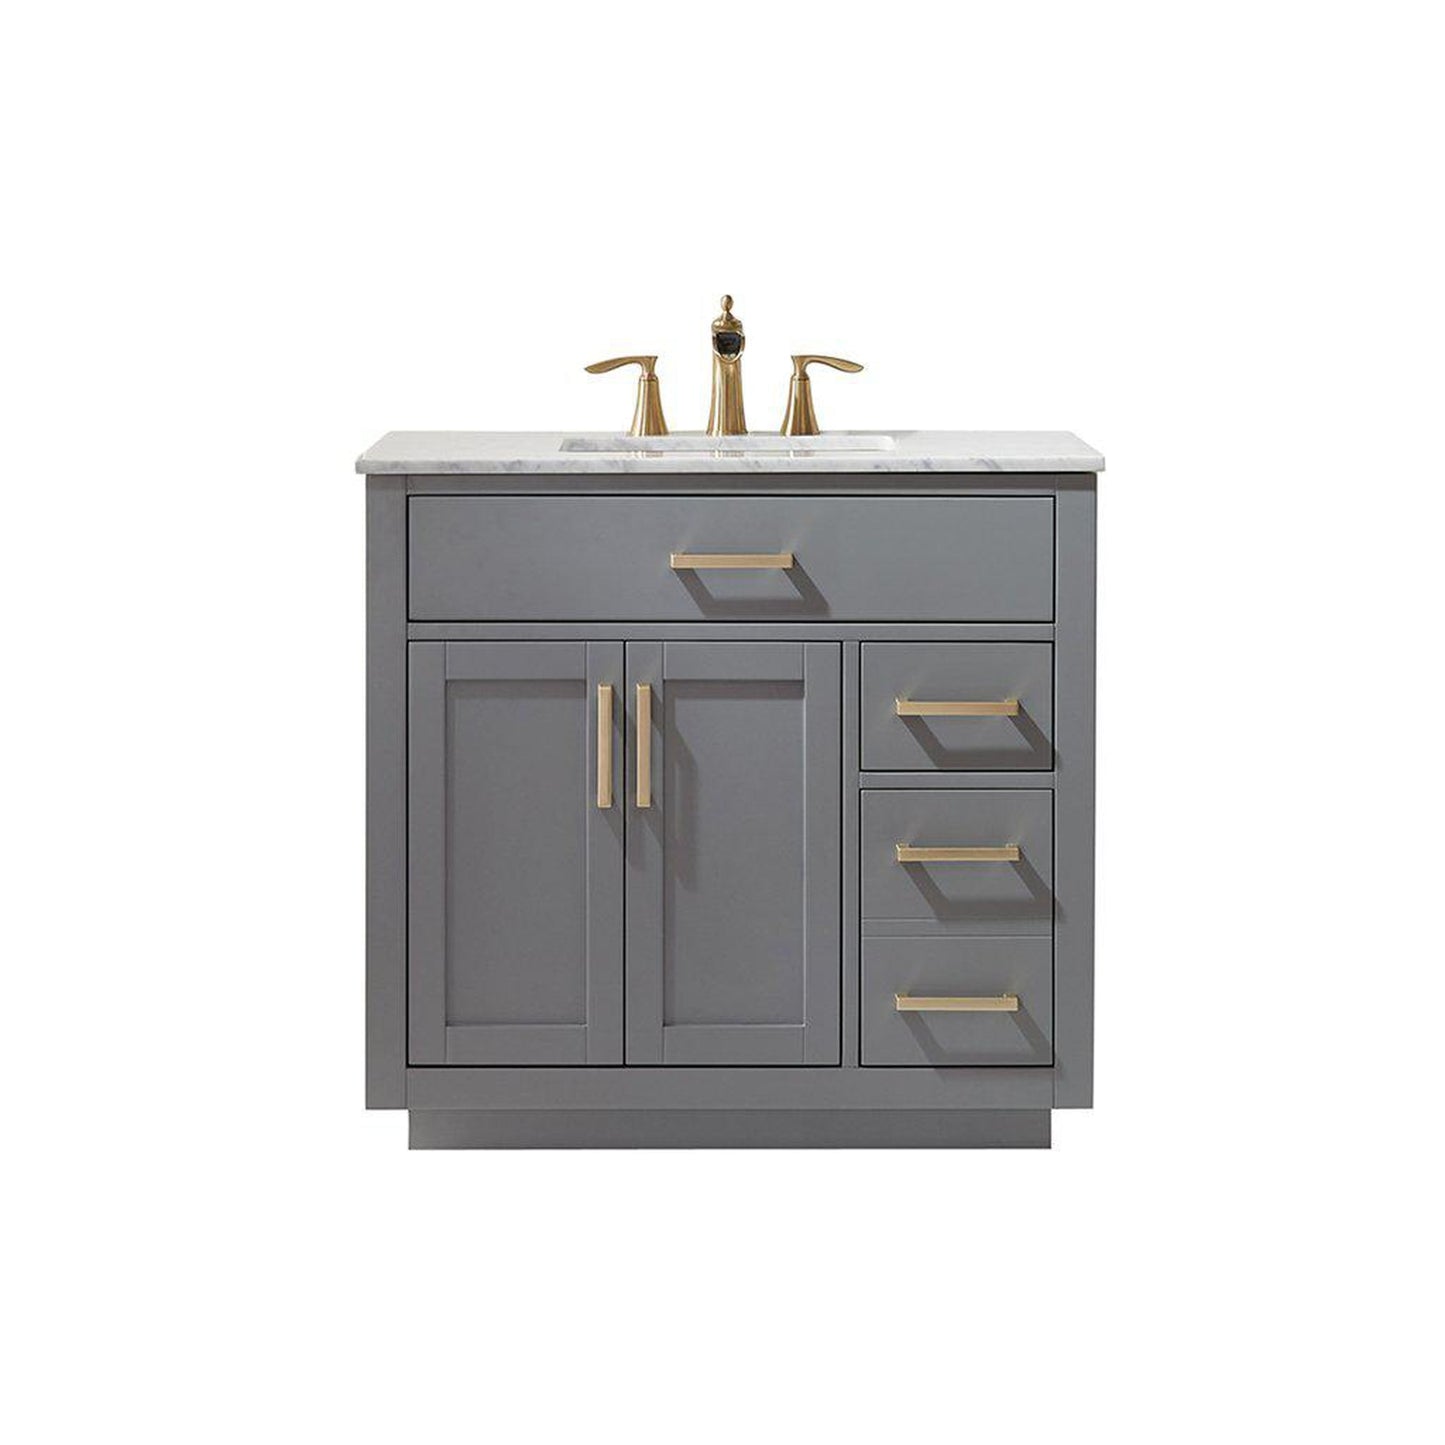 Altair Ivy 36" Single Gray Freestanding Bathroom Vanity Set With Natural Carrara White Marble Top, Rectangular Undermount Ceramic Sink, and Overflow